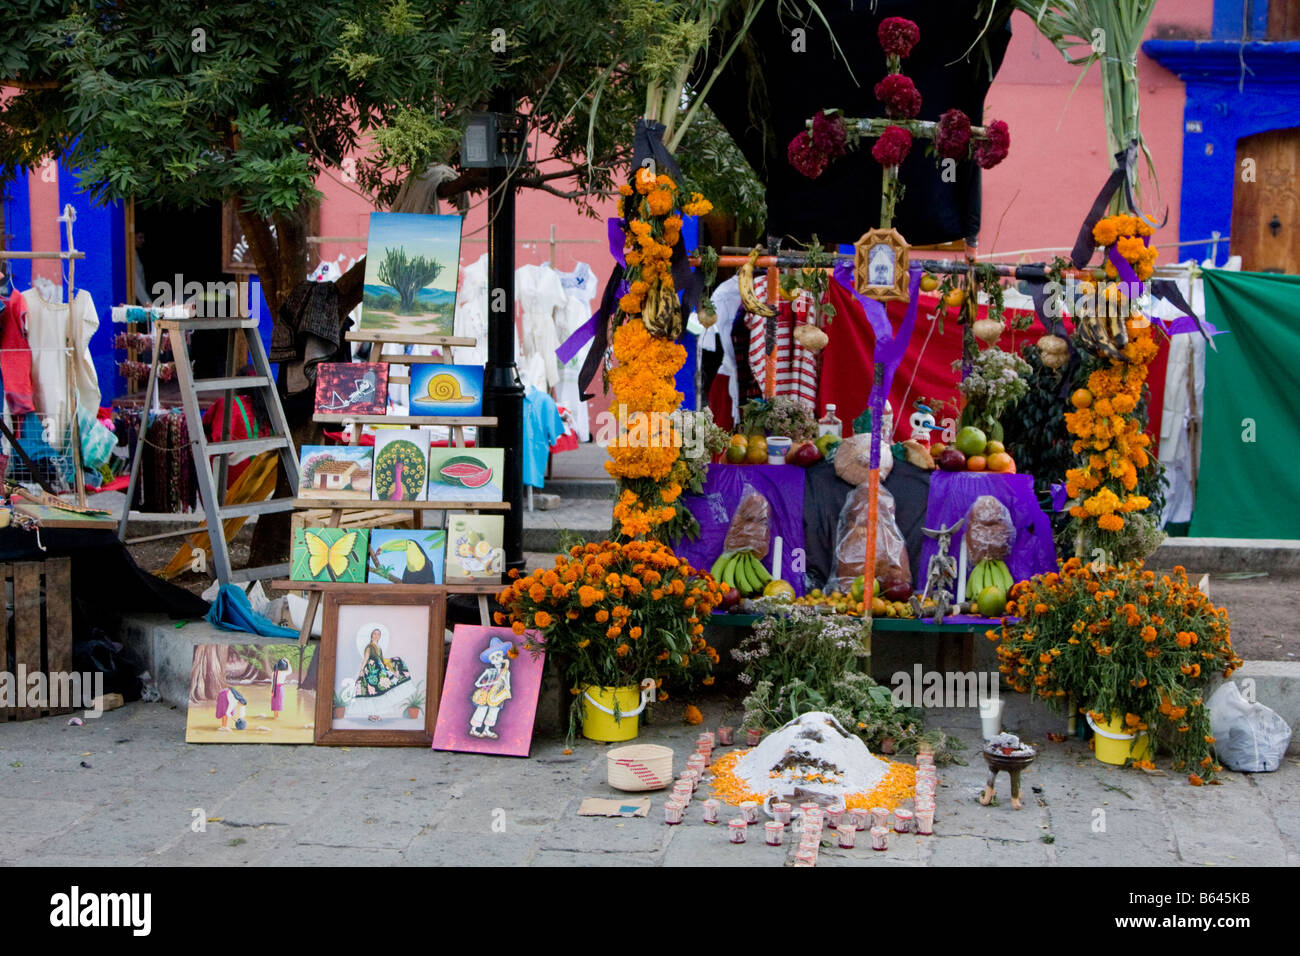 Oaxaca, Mexico. Day of the Dead. Altar in Memory of the Dead at Vendor's Stand Selling Folk Art Paintings. Stock Photo